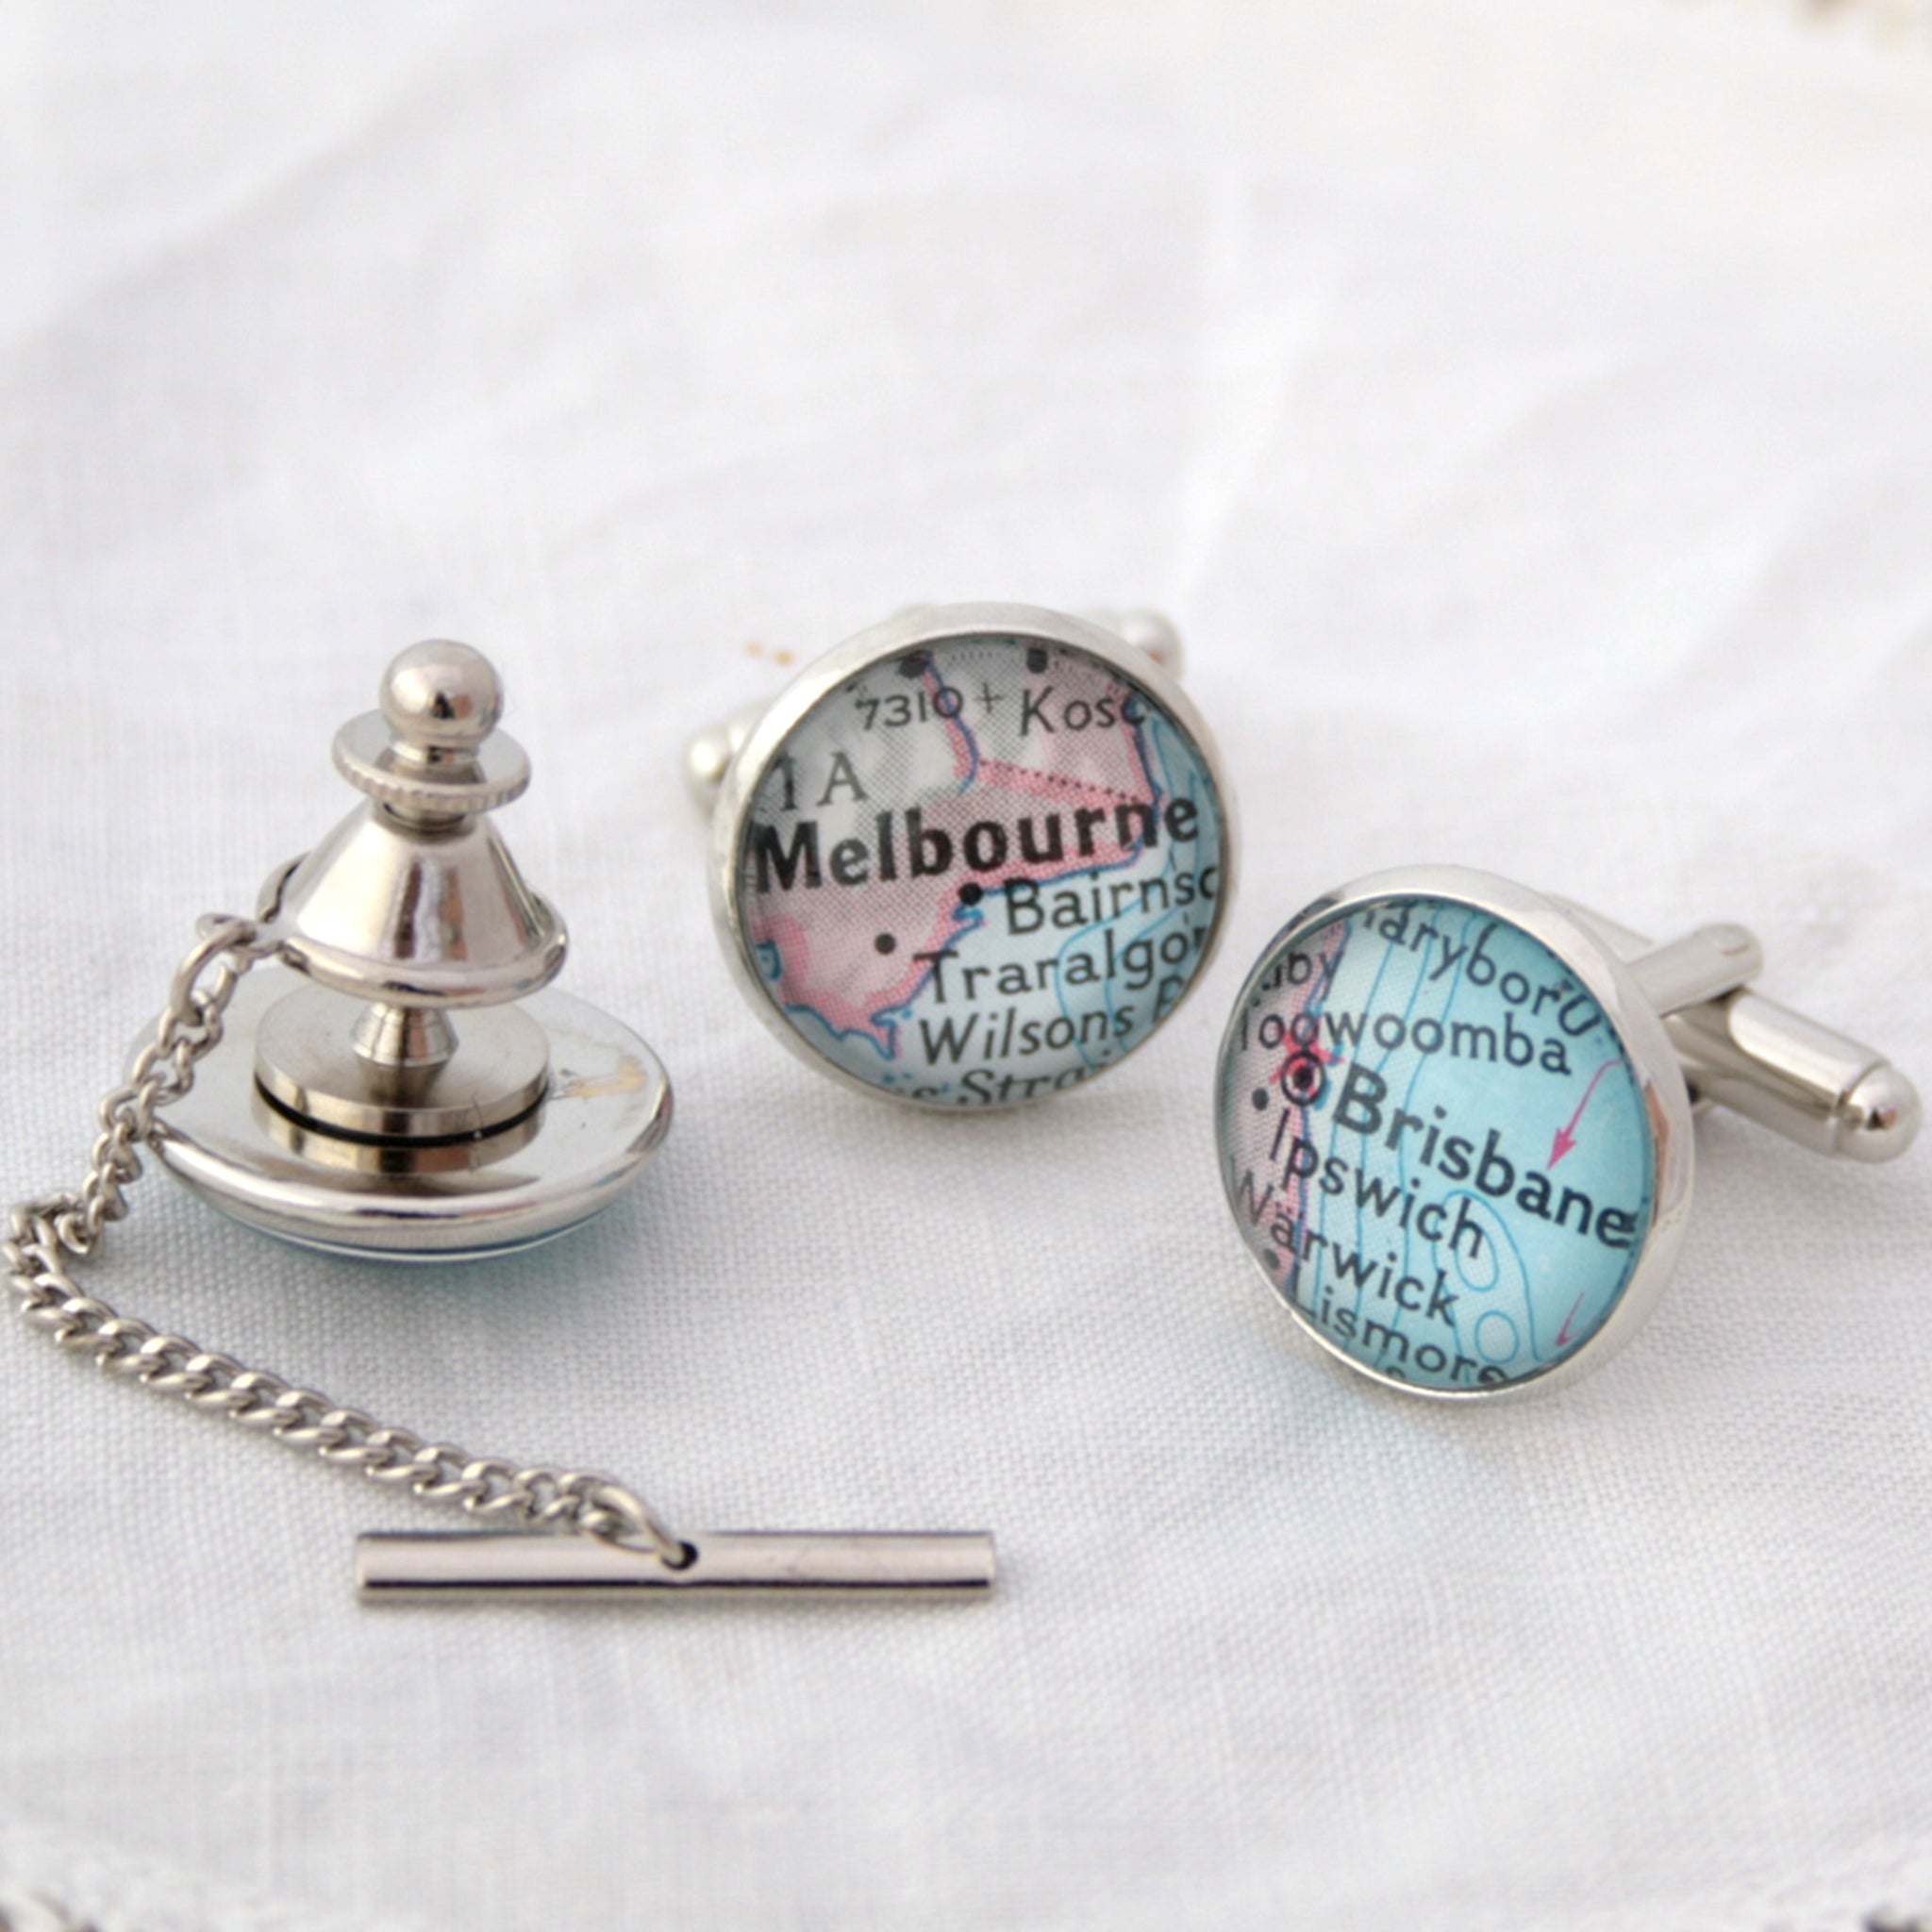 Personalised Map Cufflinks and Tie Tack in silver colour featuring Hobart, Brisbane and Melbourne